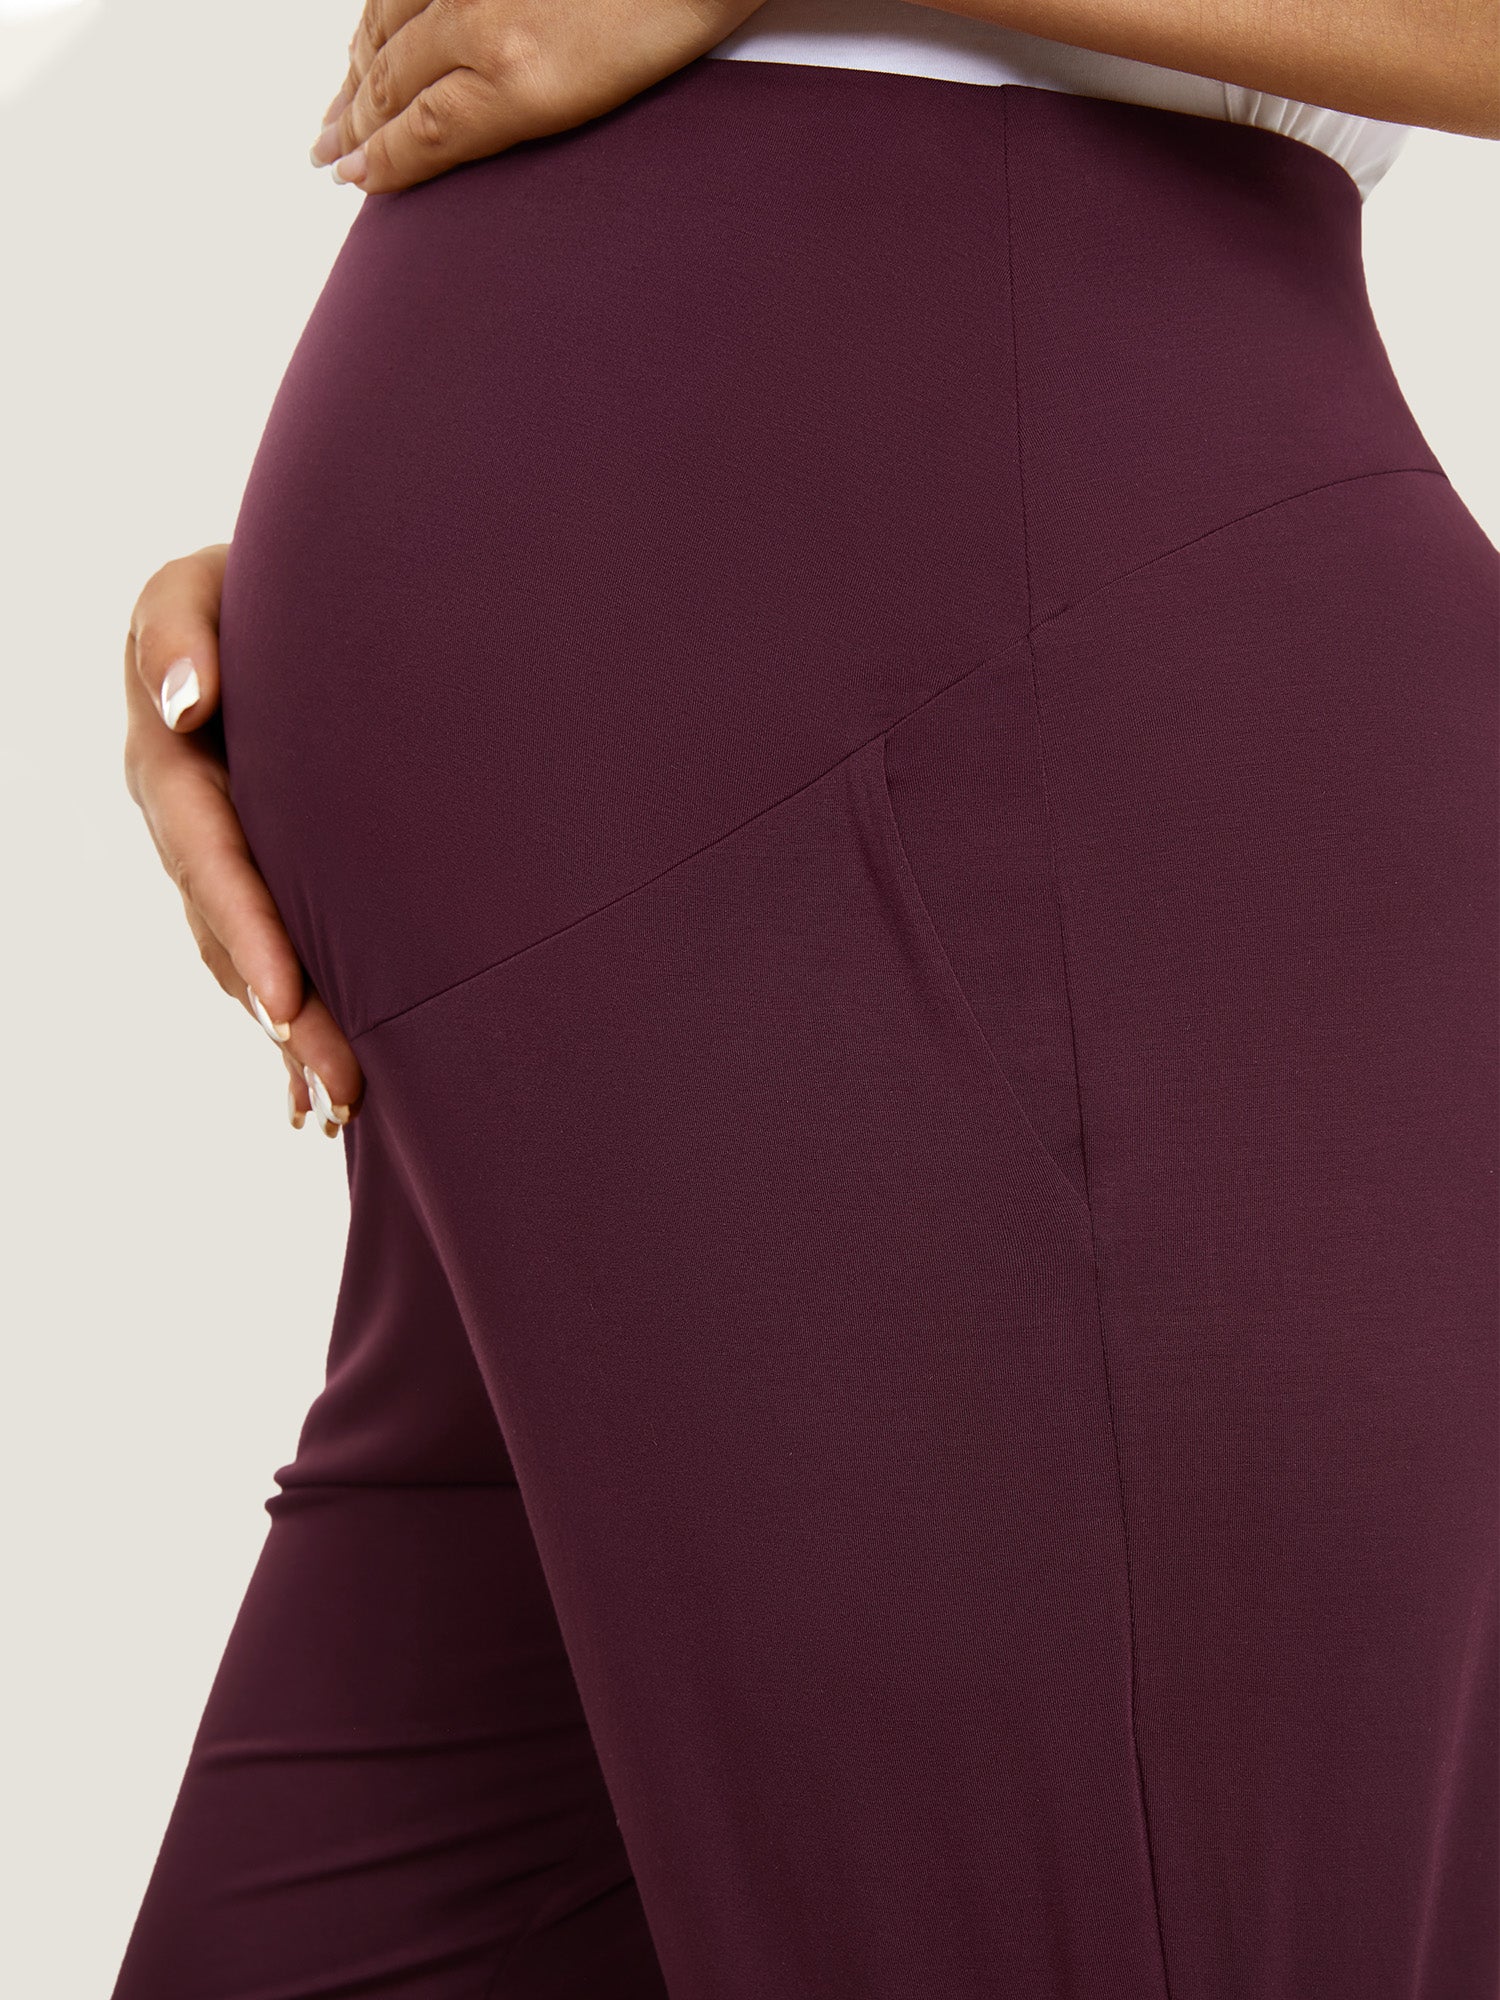 Casual Stretchy Maternity Joggers